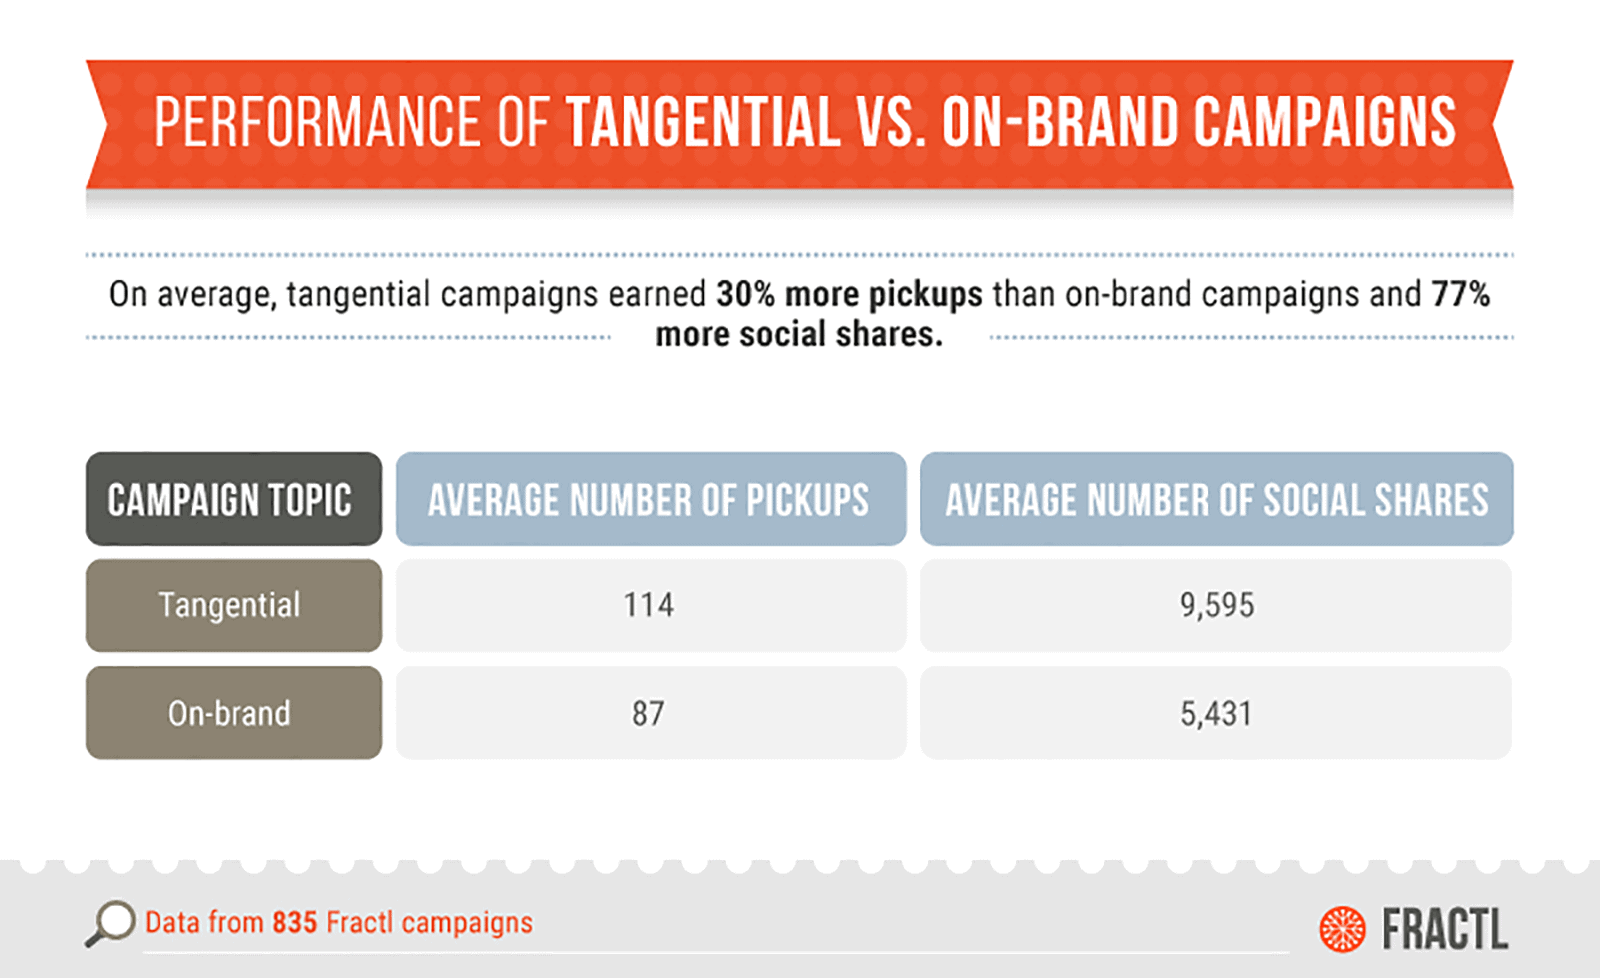 Tangential content resulted in more links and shares